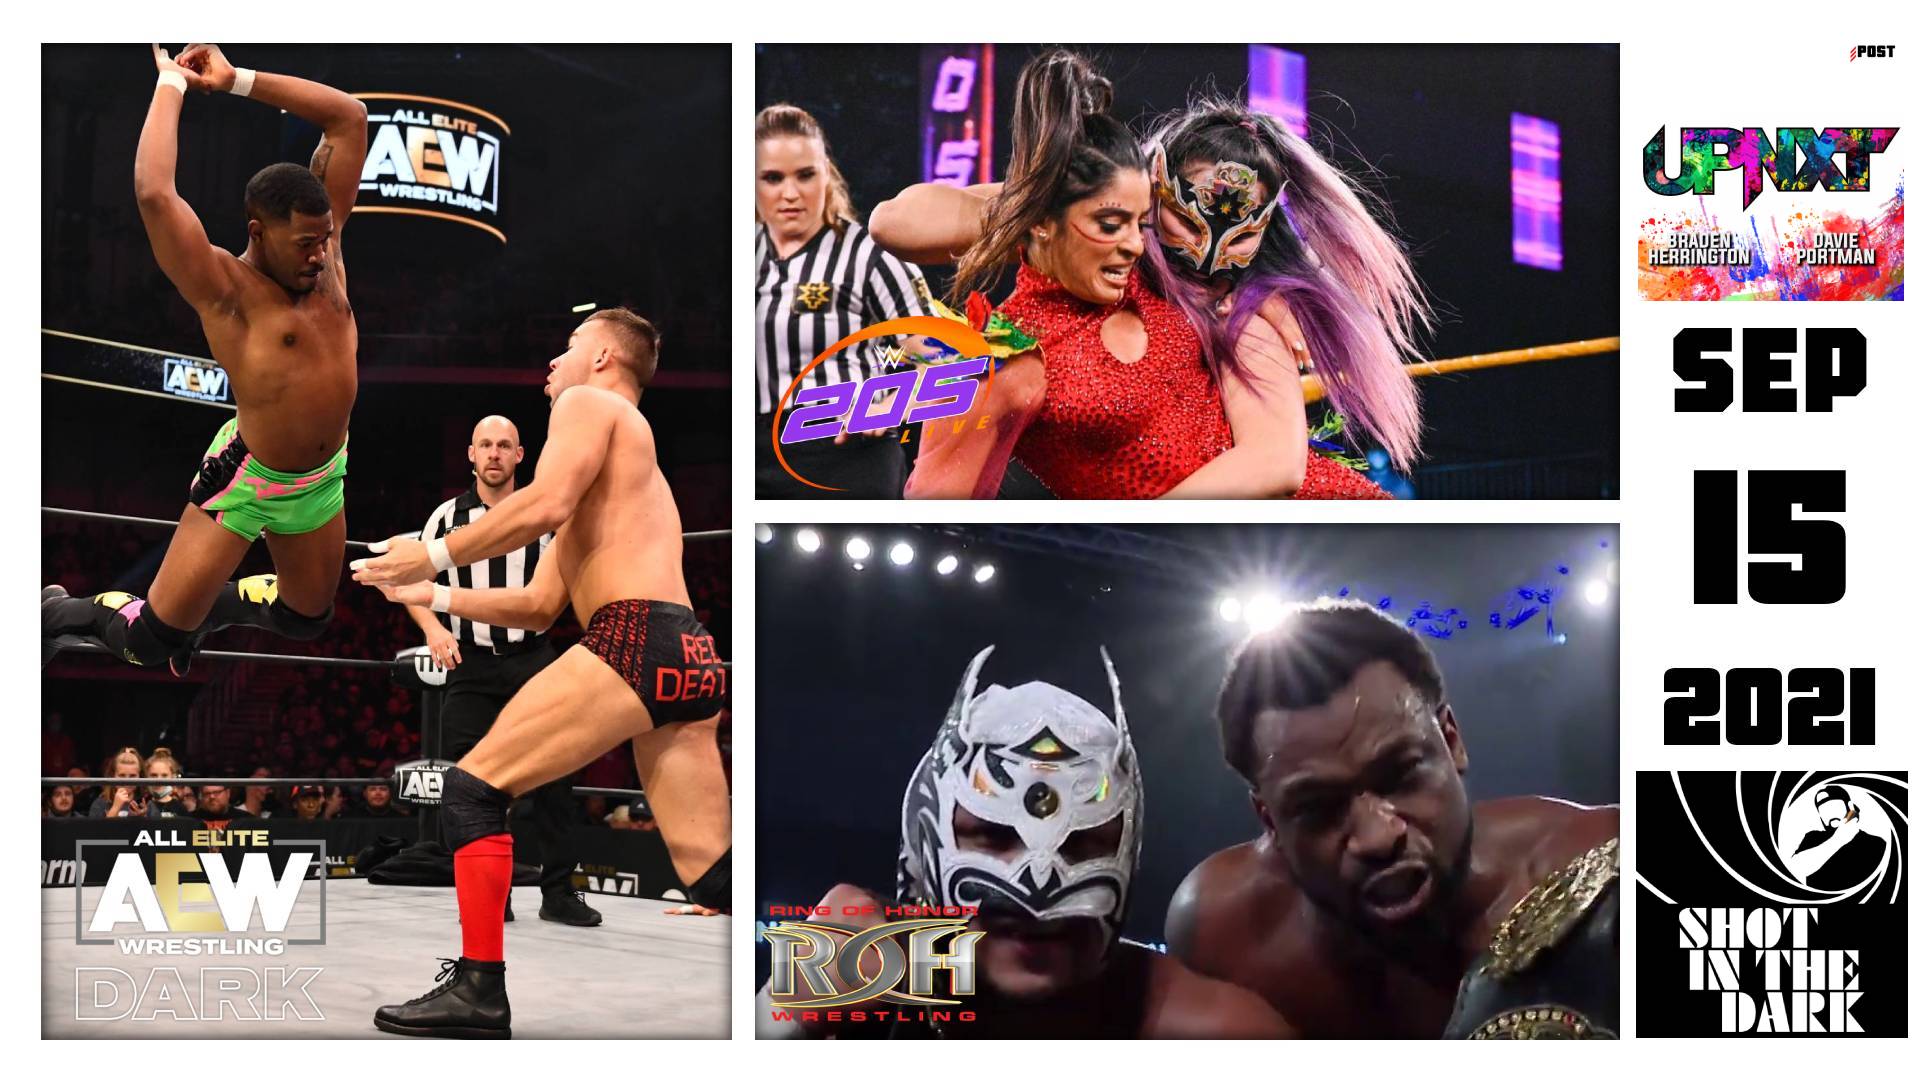 SITD 9/15/21: AEW Dark Debuts at Universal Studios, New ROH Tag Team Champs